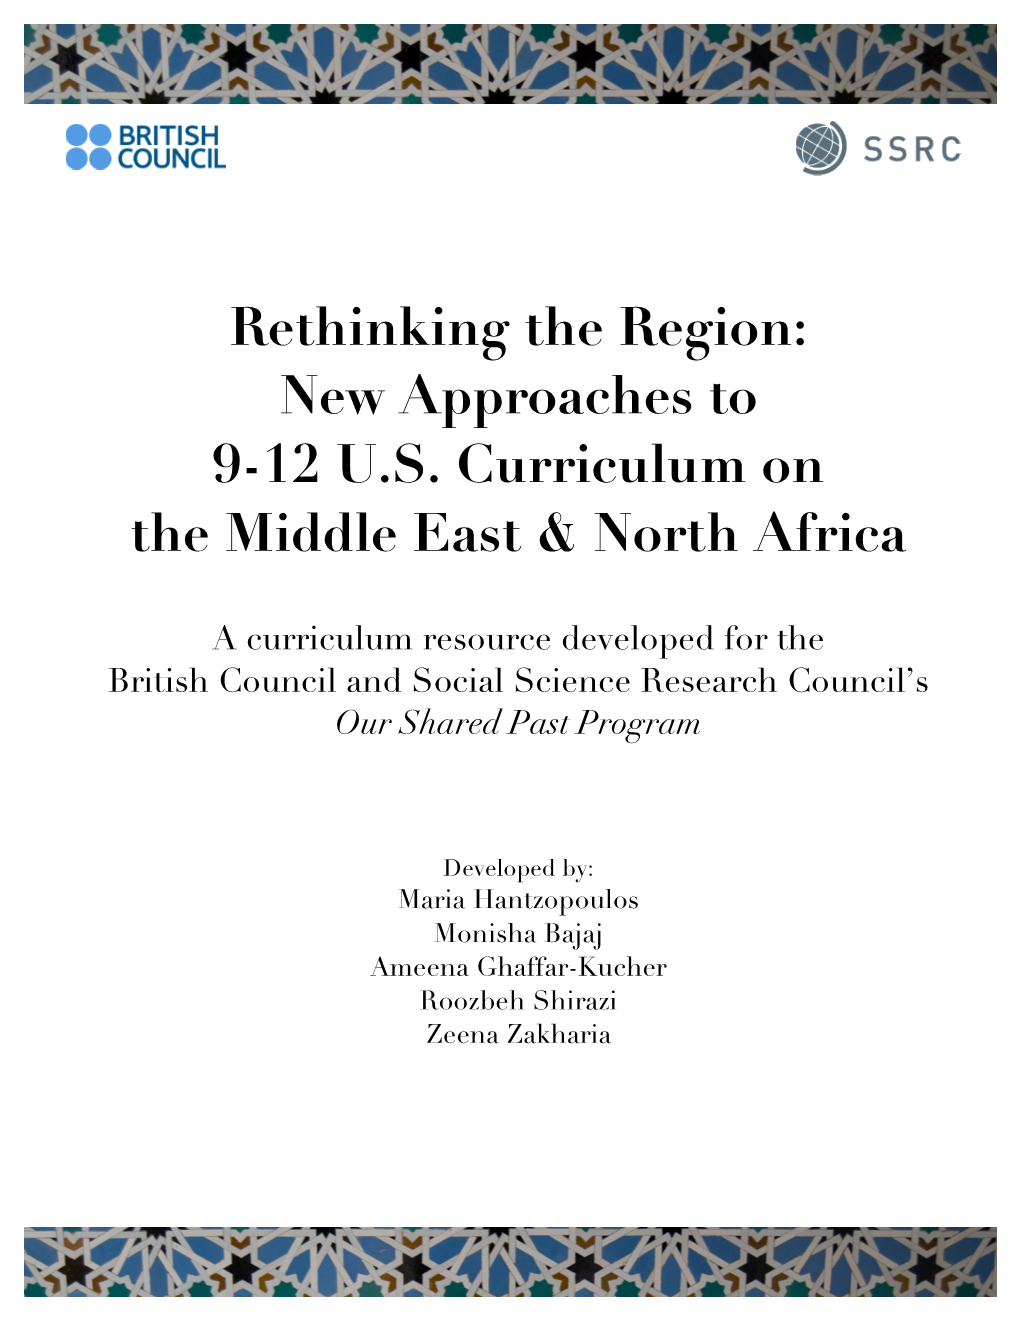 Rethinking the Region: New Approaches to 9-12 U.S. Curriculum on the Middle East & North Africa